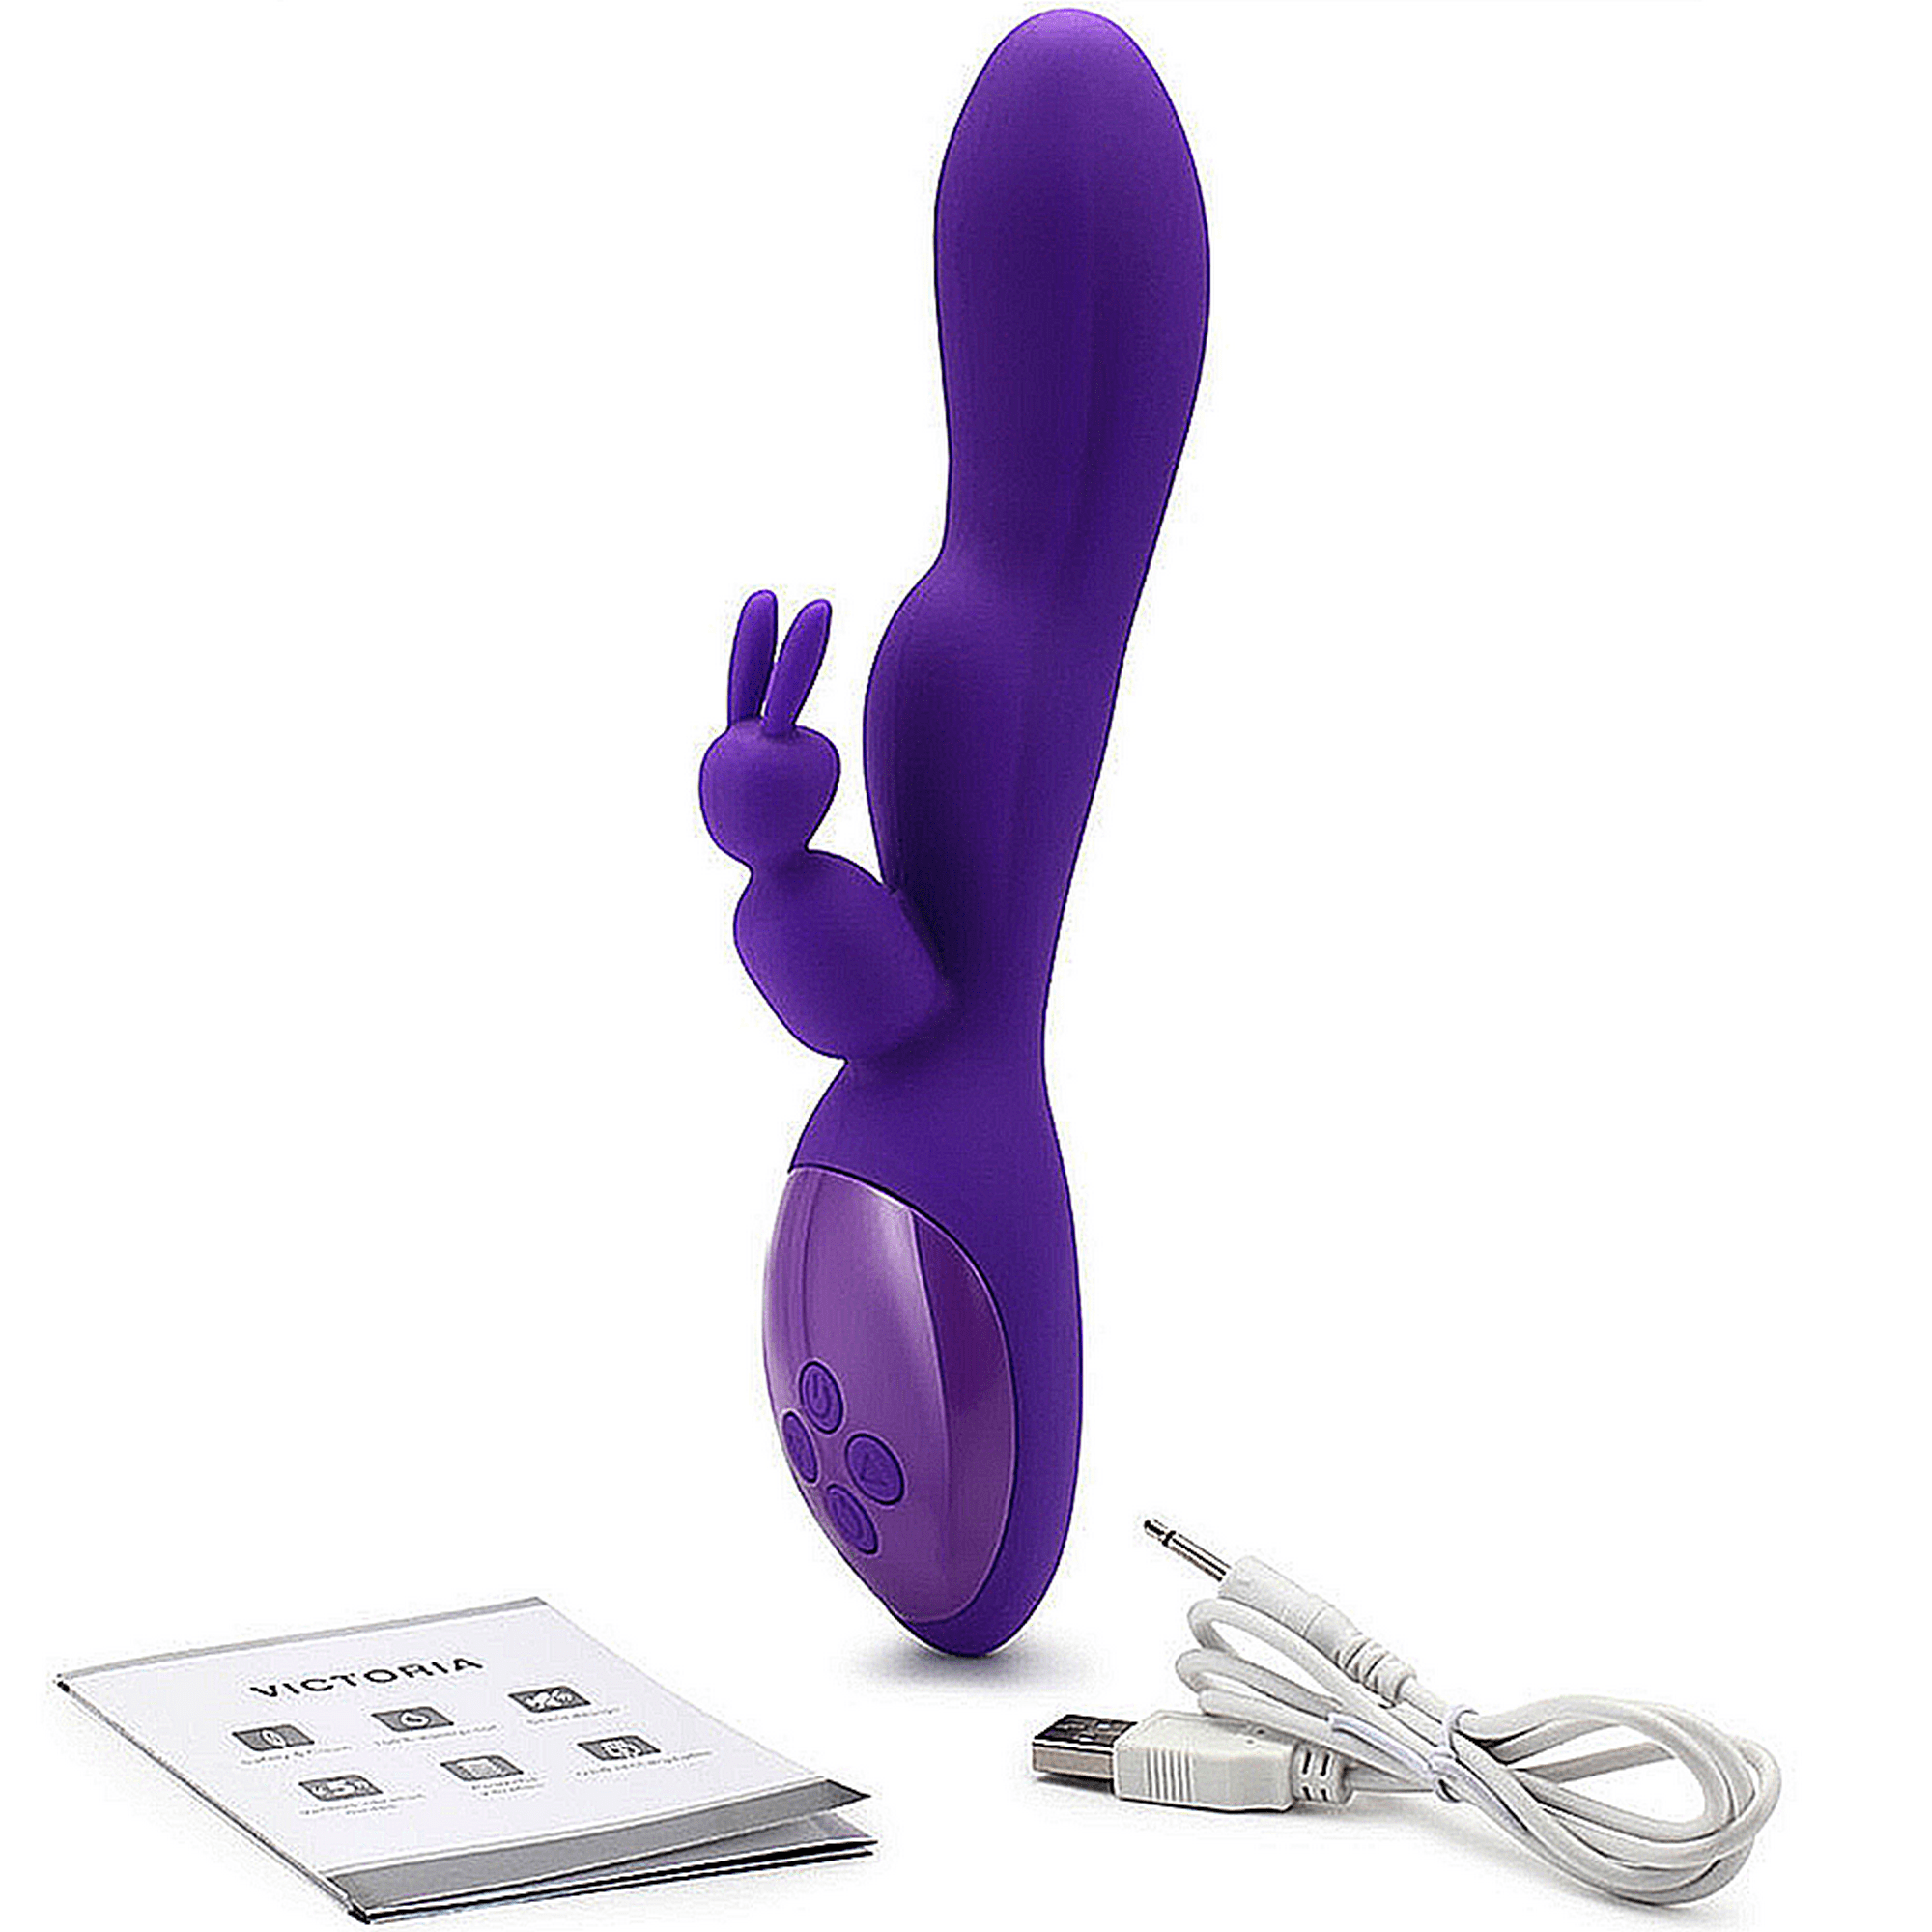 LotFancy Rabbit Vibrator for Women, G Spot and Clitoral Stimulator, Adult Sex Toys for Couple, Purple